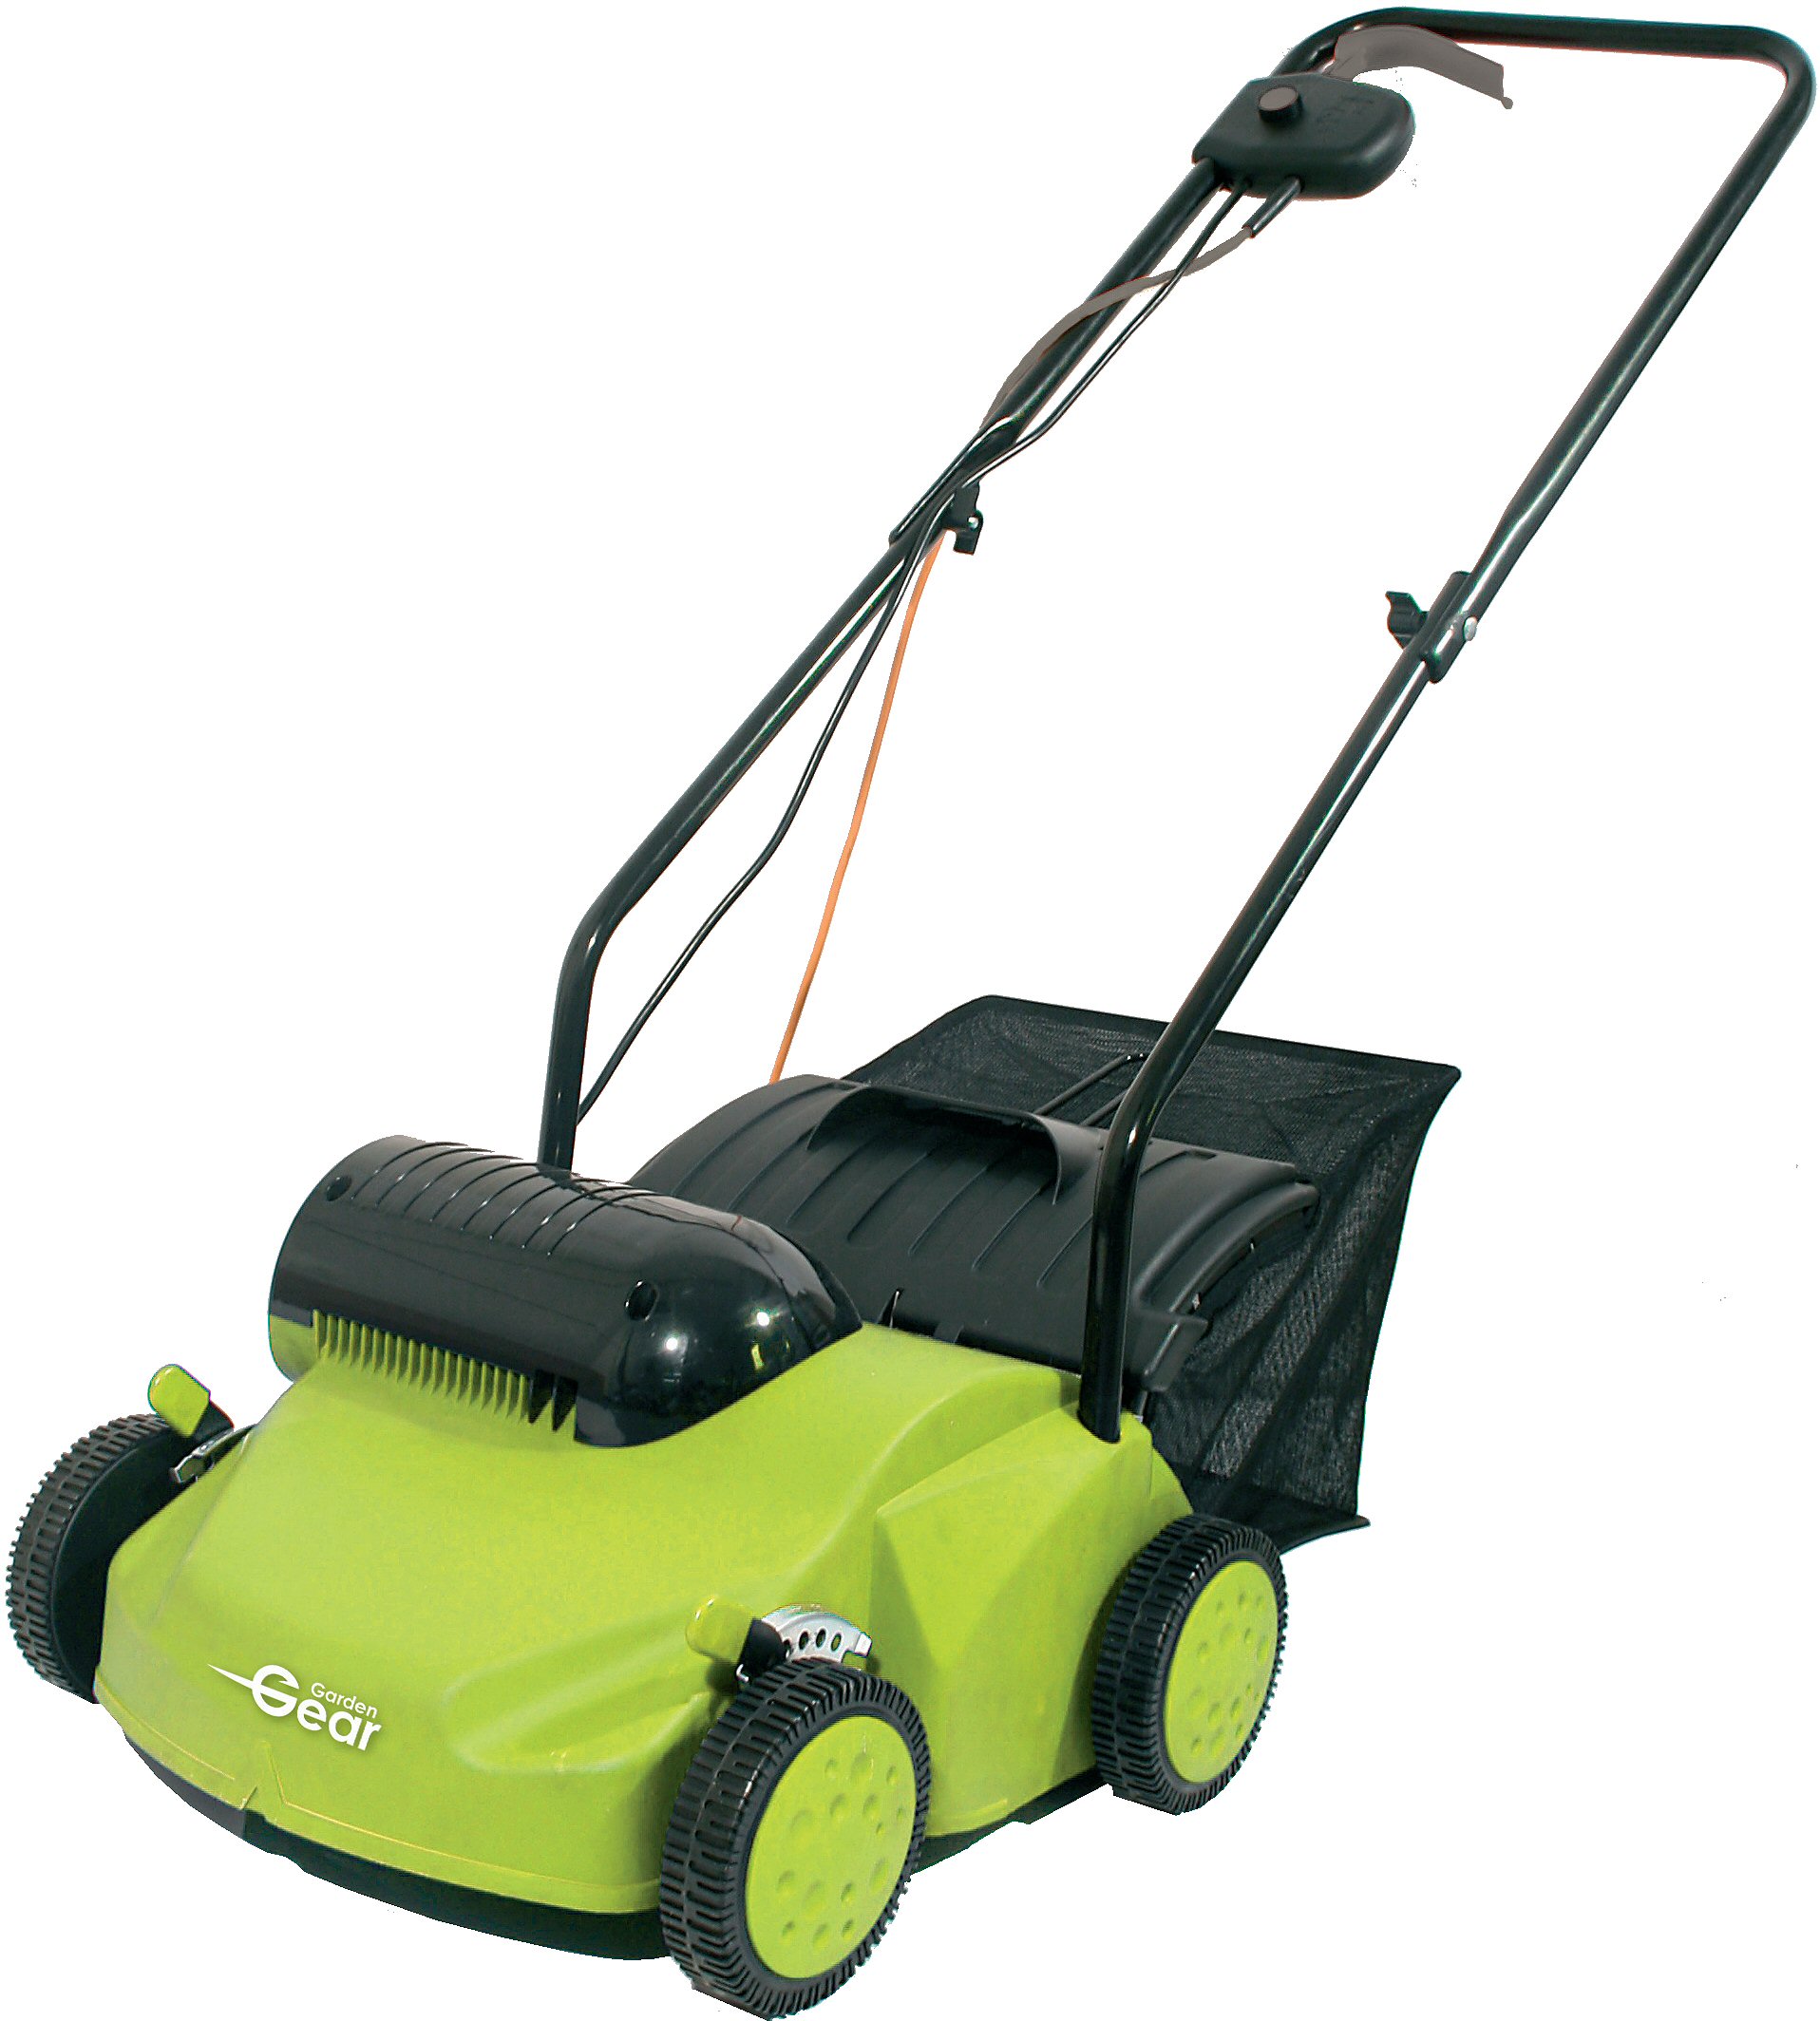 This lawn rake and scarifier tackles two jobs with just one tool, allowing you to keep your lawn in 